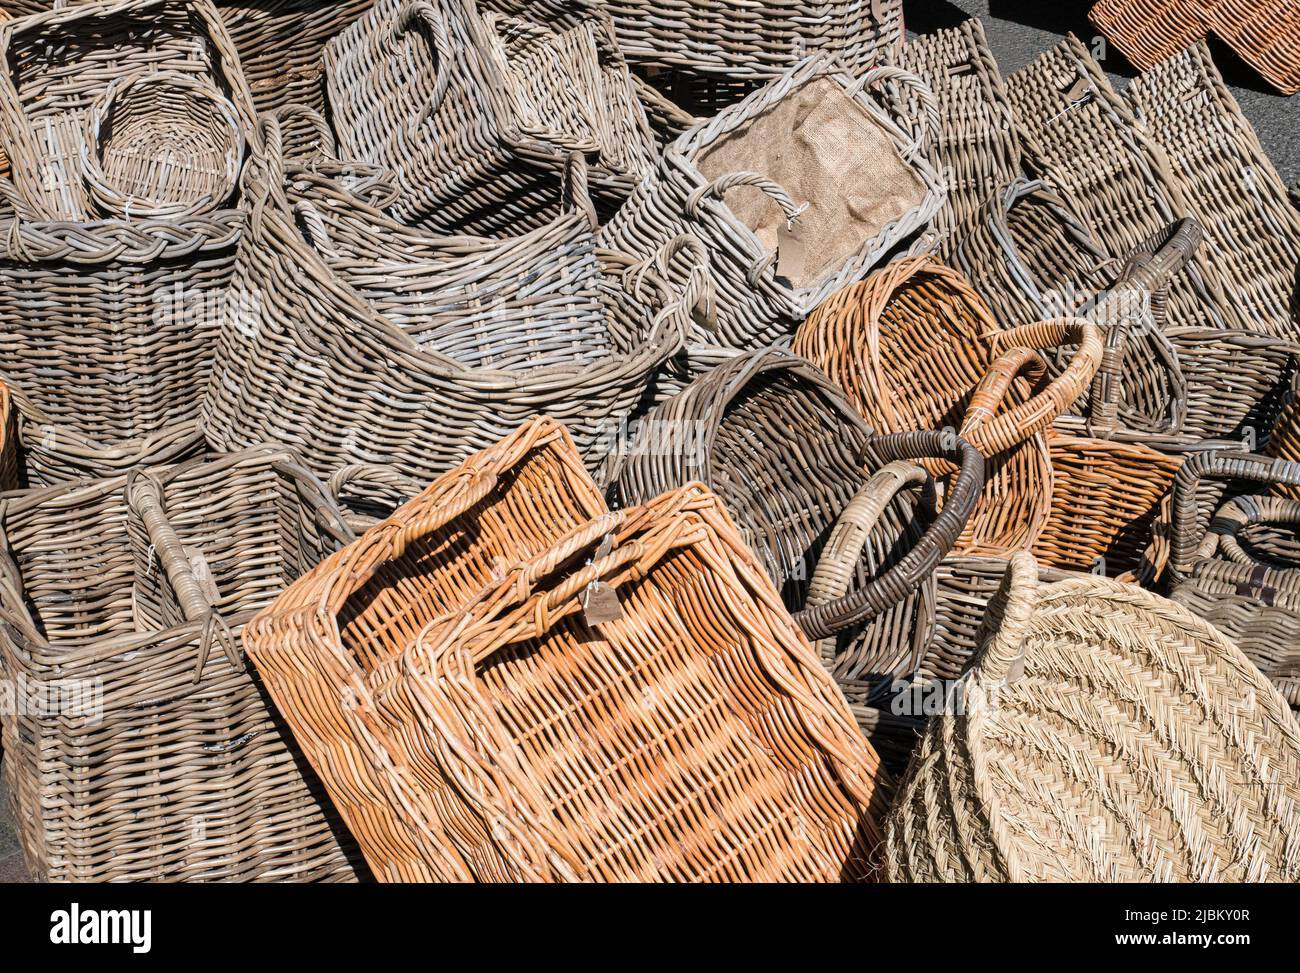 Pile of wicker baskets Stock Photo